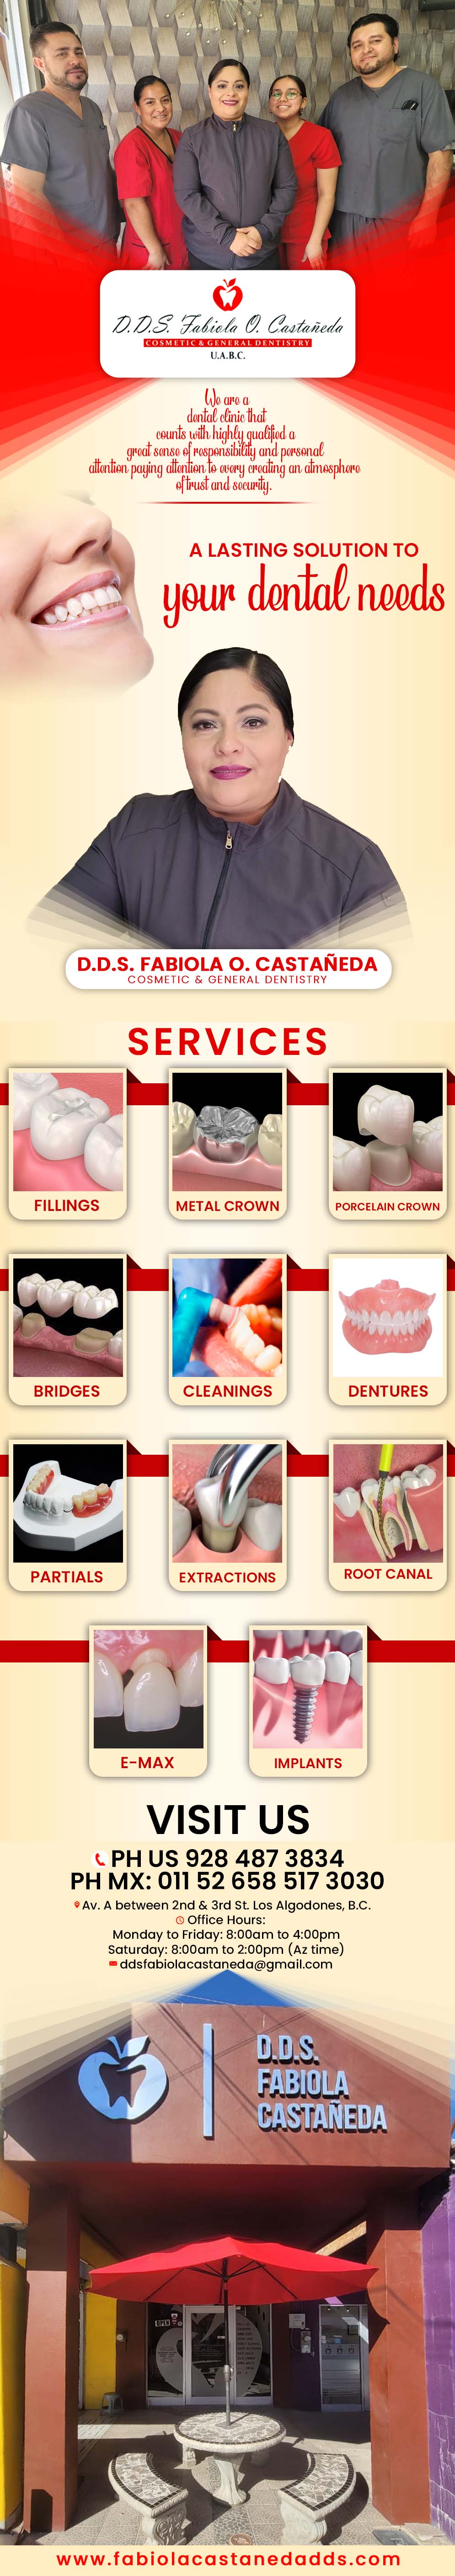 DDS. Fabiola O. Castaneda Cosmetic & General Dentistry-We are a dental clinic that counts with highly qualified, a great sense of responsibility and personal attention paying attention to every detail creating an atmosphere of trust and security. Services: Fillings, Bridges, Porcelain Crown, Cleanings, Dentures, Partials, Extractions, Root Canal.


            